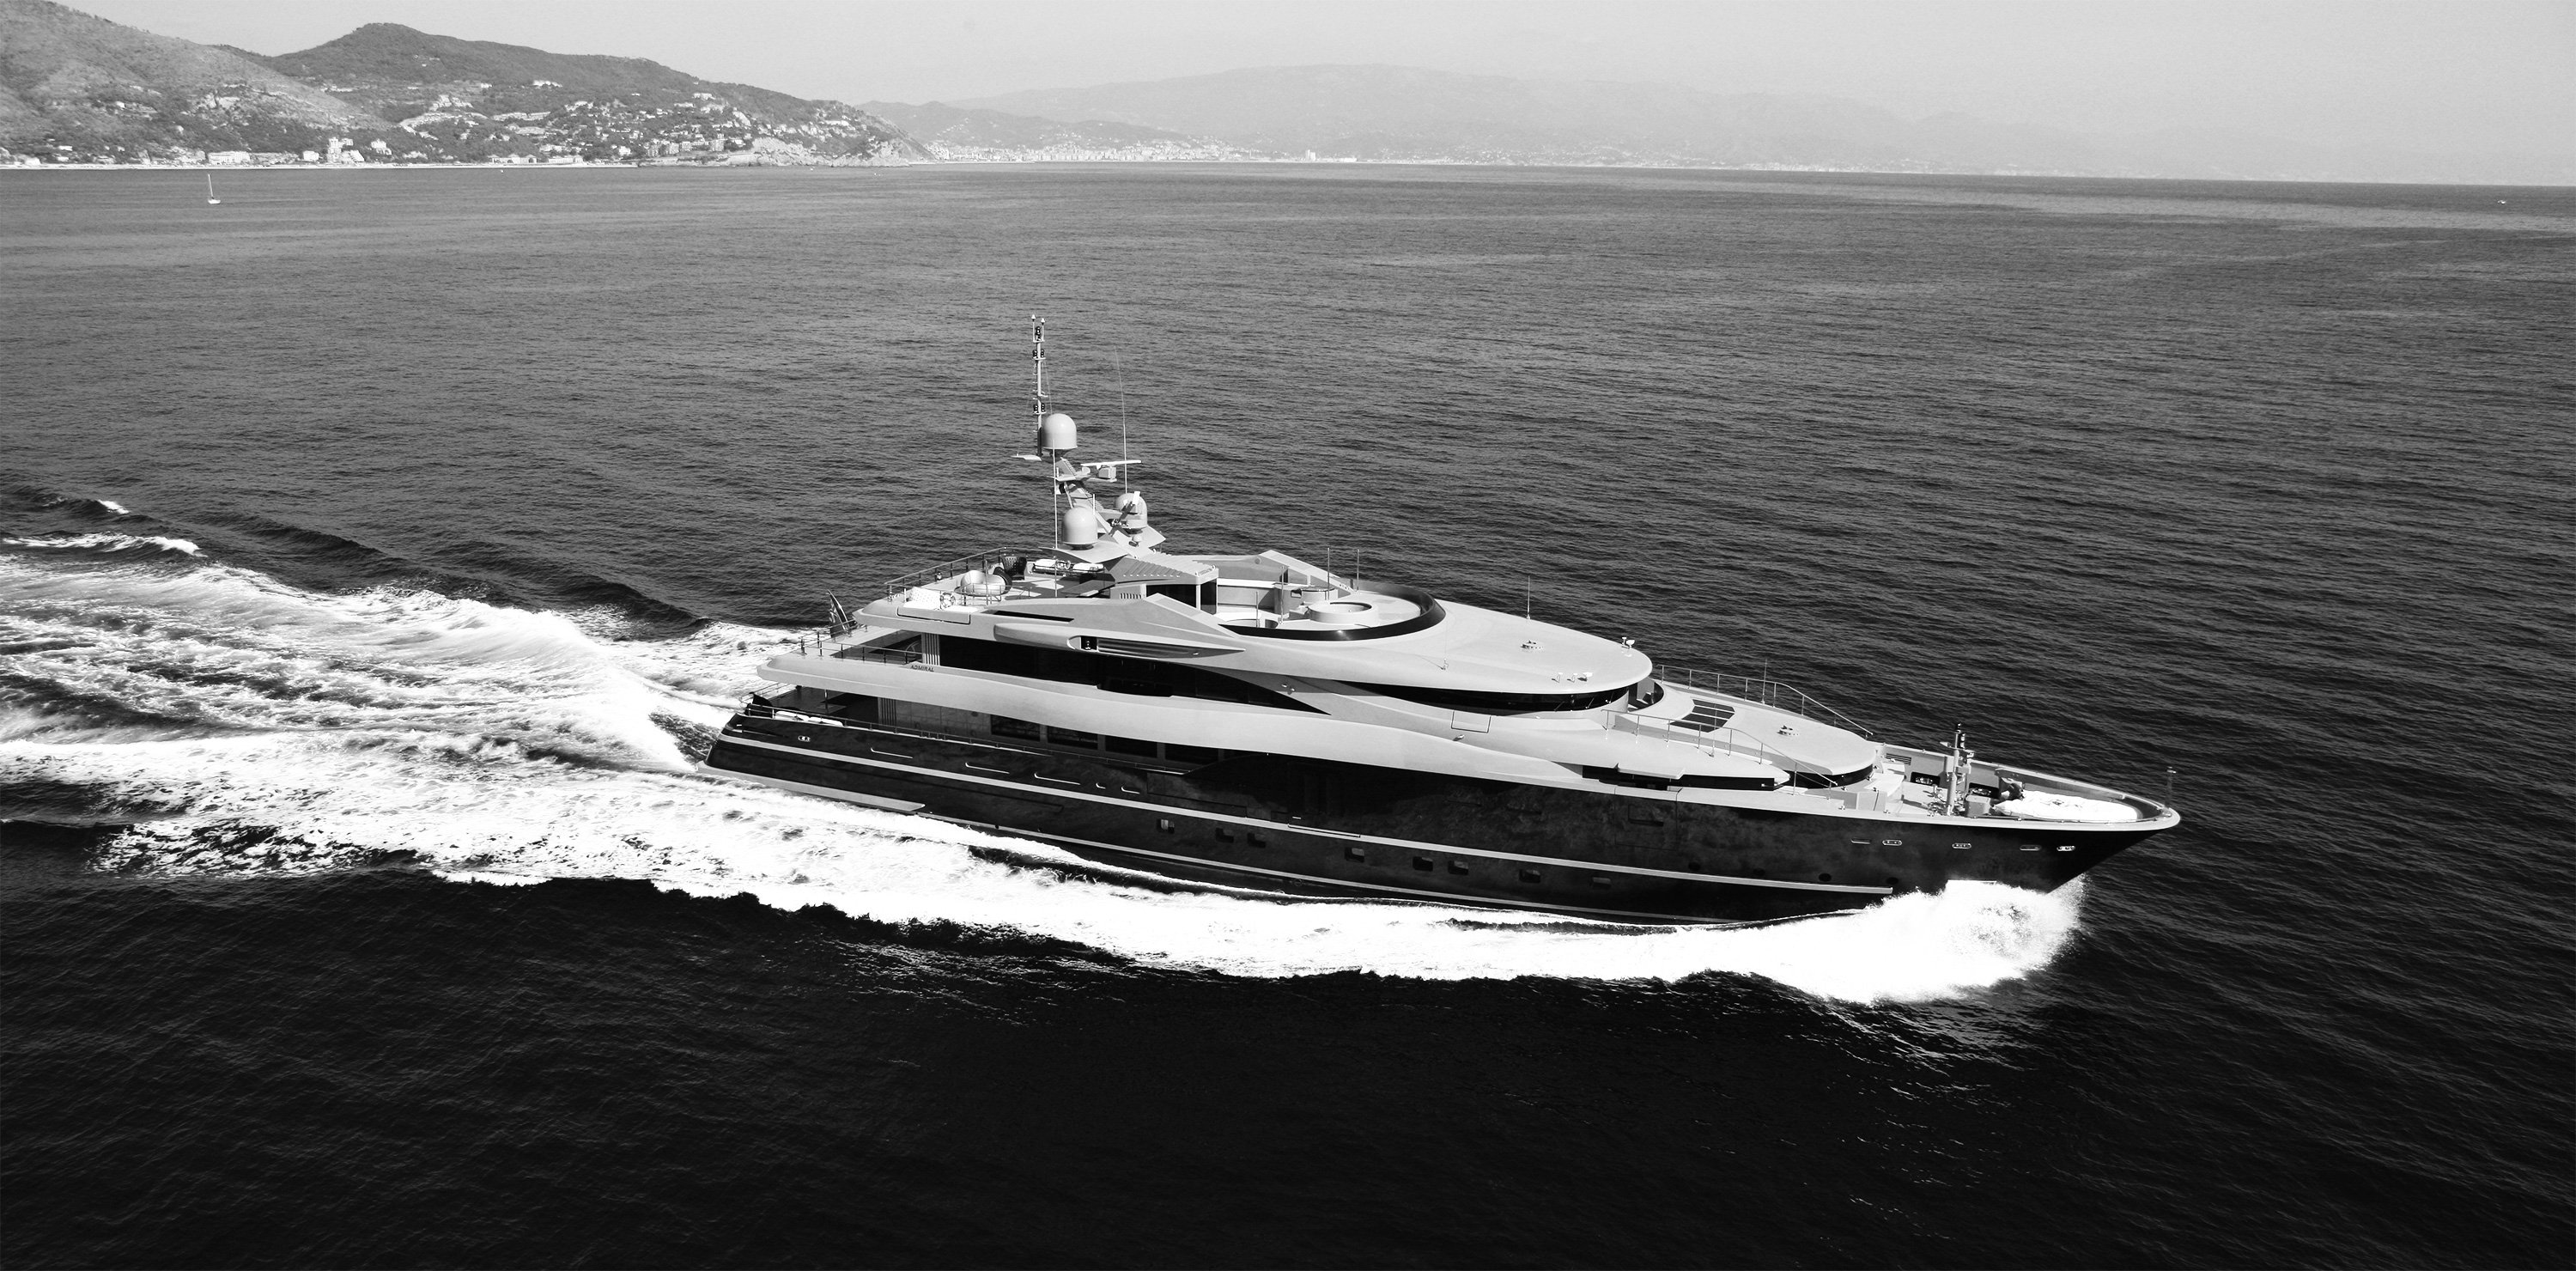 AMY - Admiral Mariotti Yachts - M/Y Sea Force One